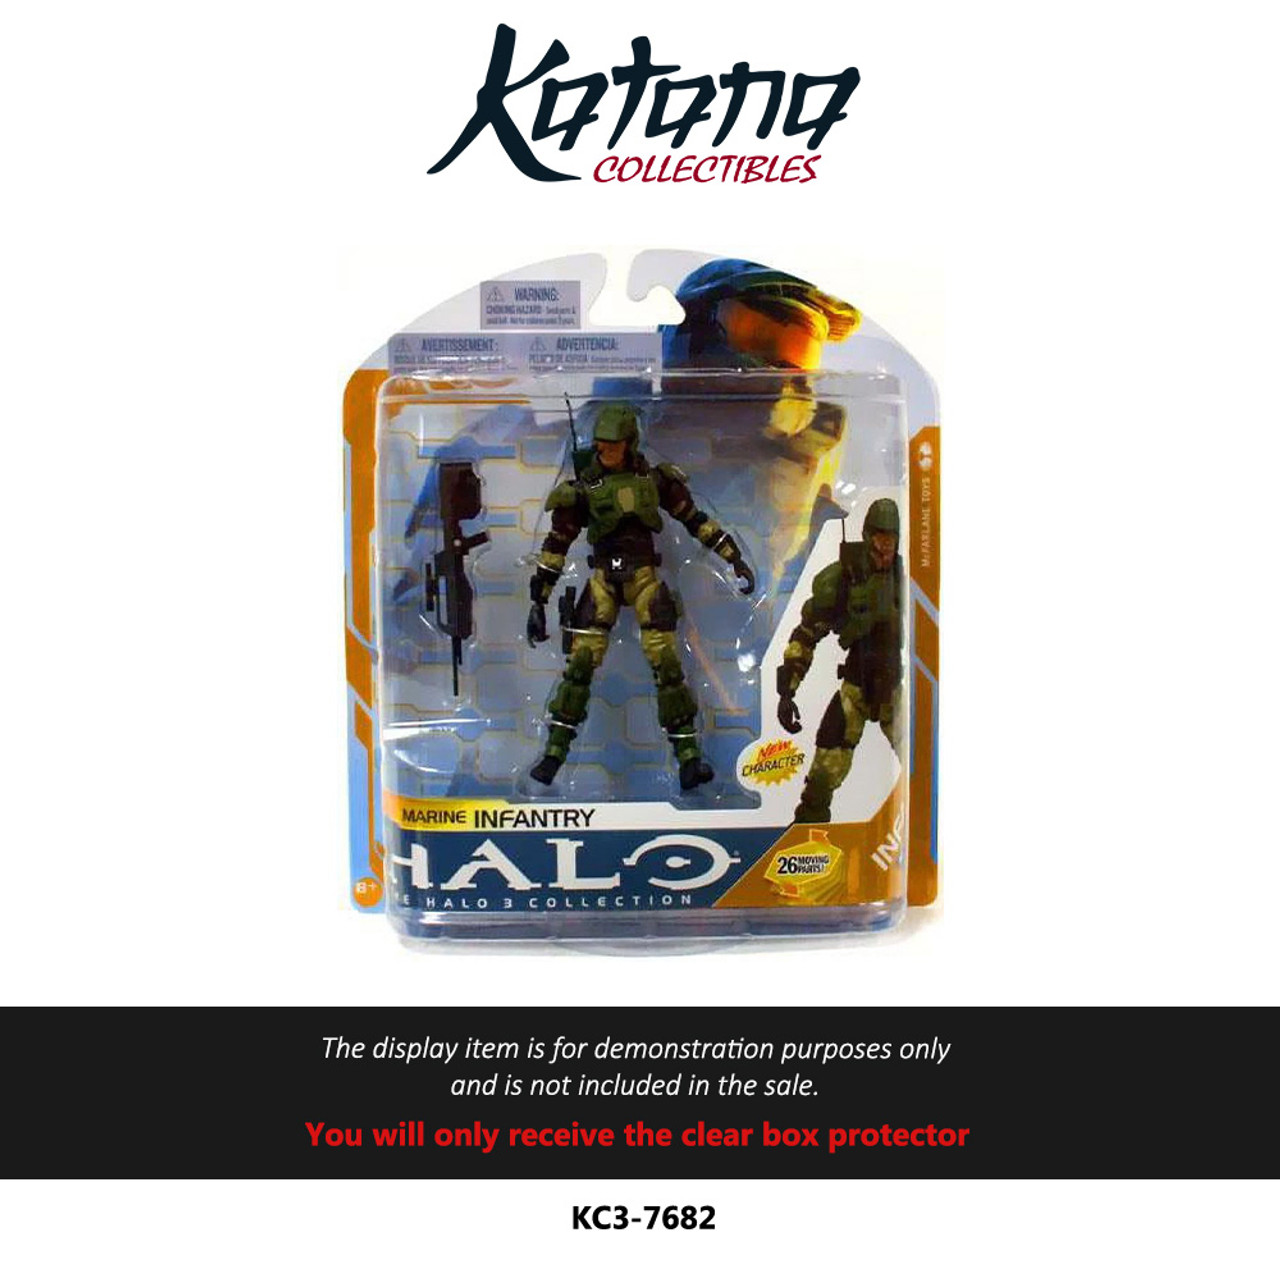 Katana Collectibles Protector For McFarlane Toys Halo 3 Series 8 Marine Infantry Action Figure